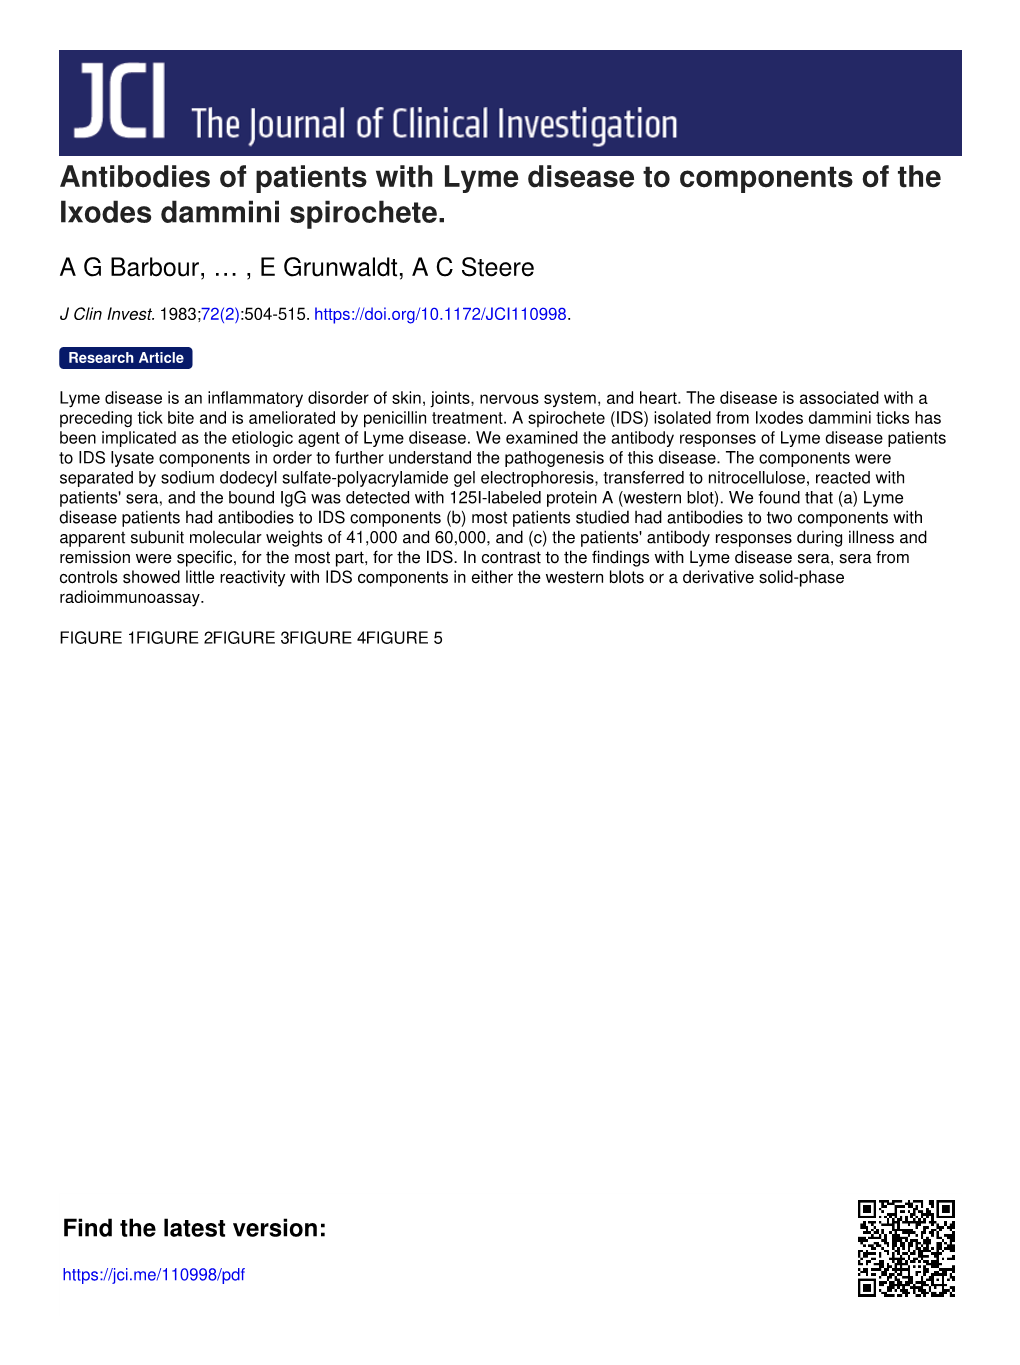 Antibodies of Patients with Lyme Disease to Components of the Ixodes Dammini Spirochete